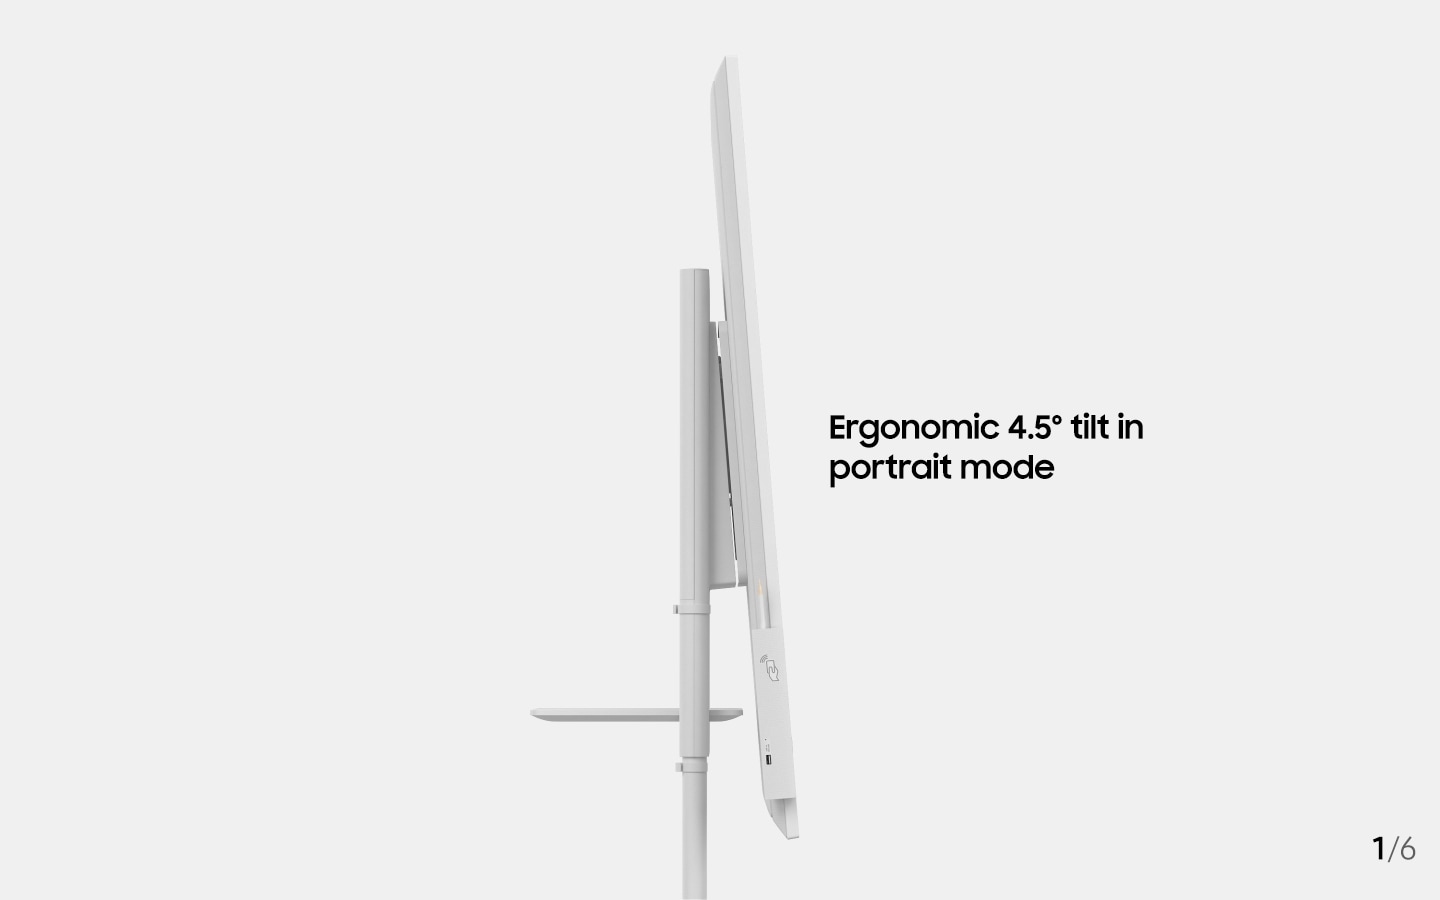 An image showing the side of a Samsung Flip device with text that reads "Ergonomic 4.5Â° tilt in portrait mode" (6-1).